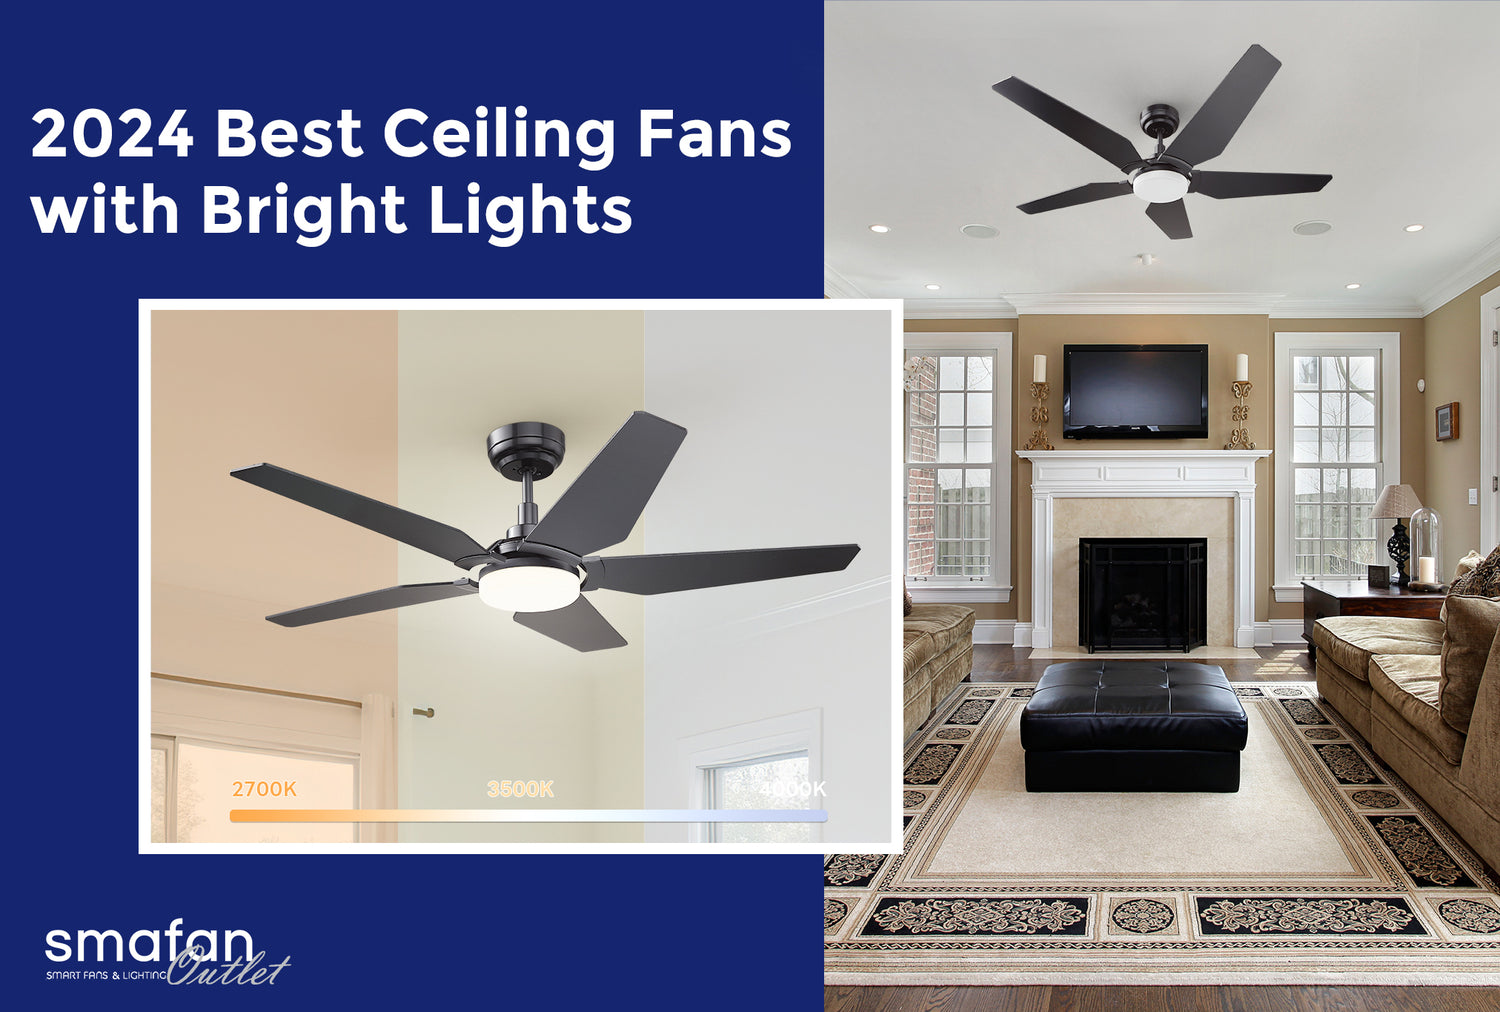 2024 Best Ceiling Fans with Bright Lights